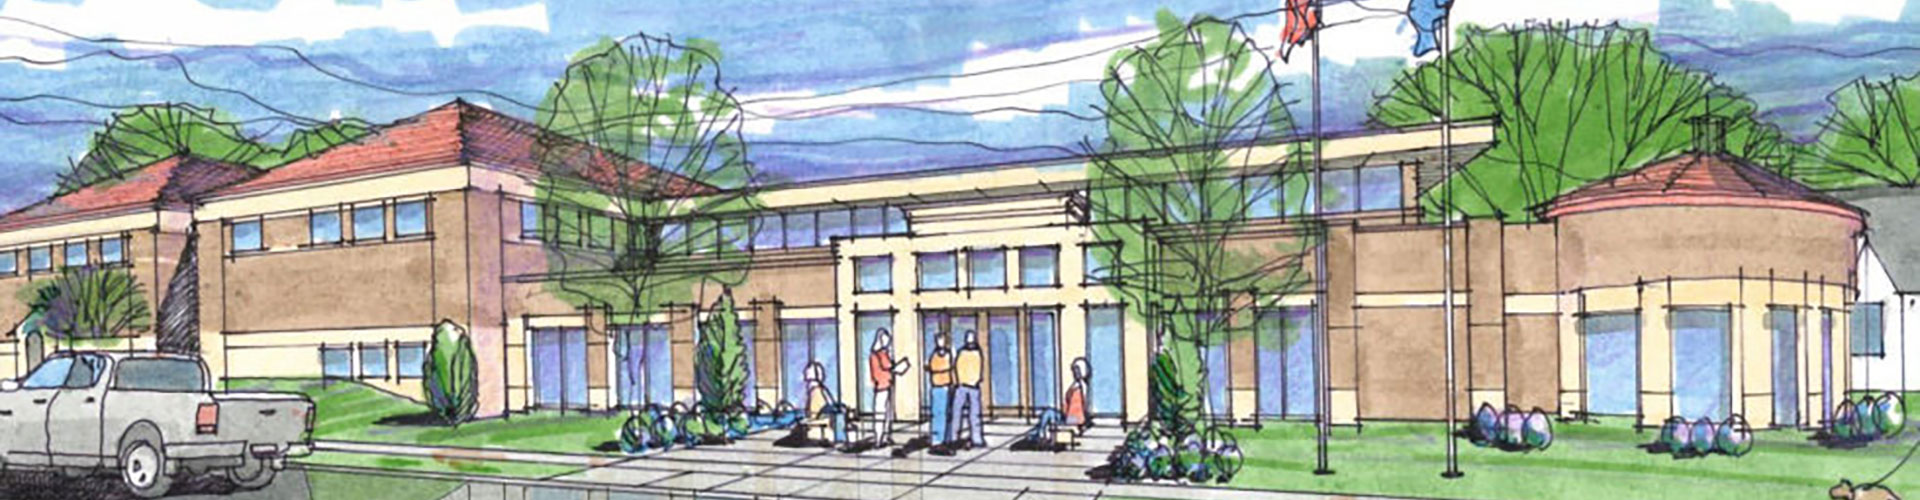 Front Elevation of New Library